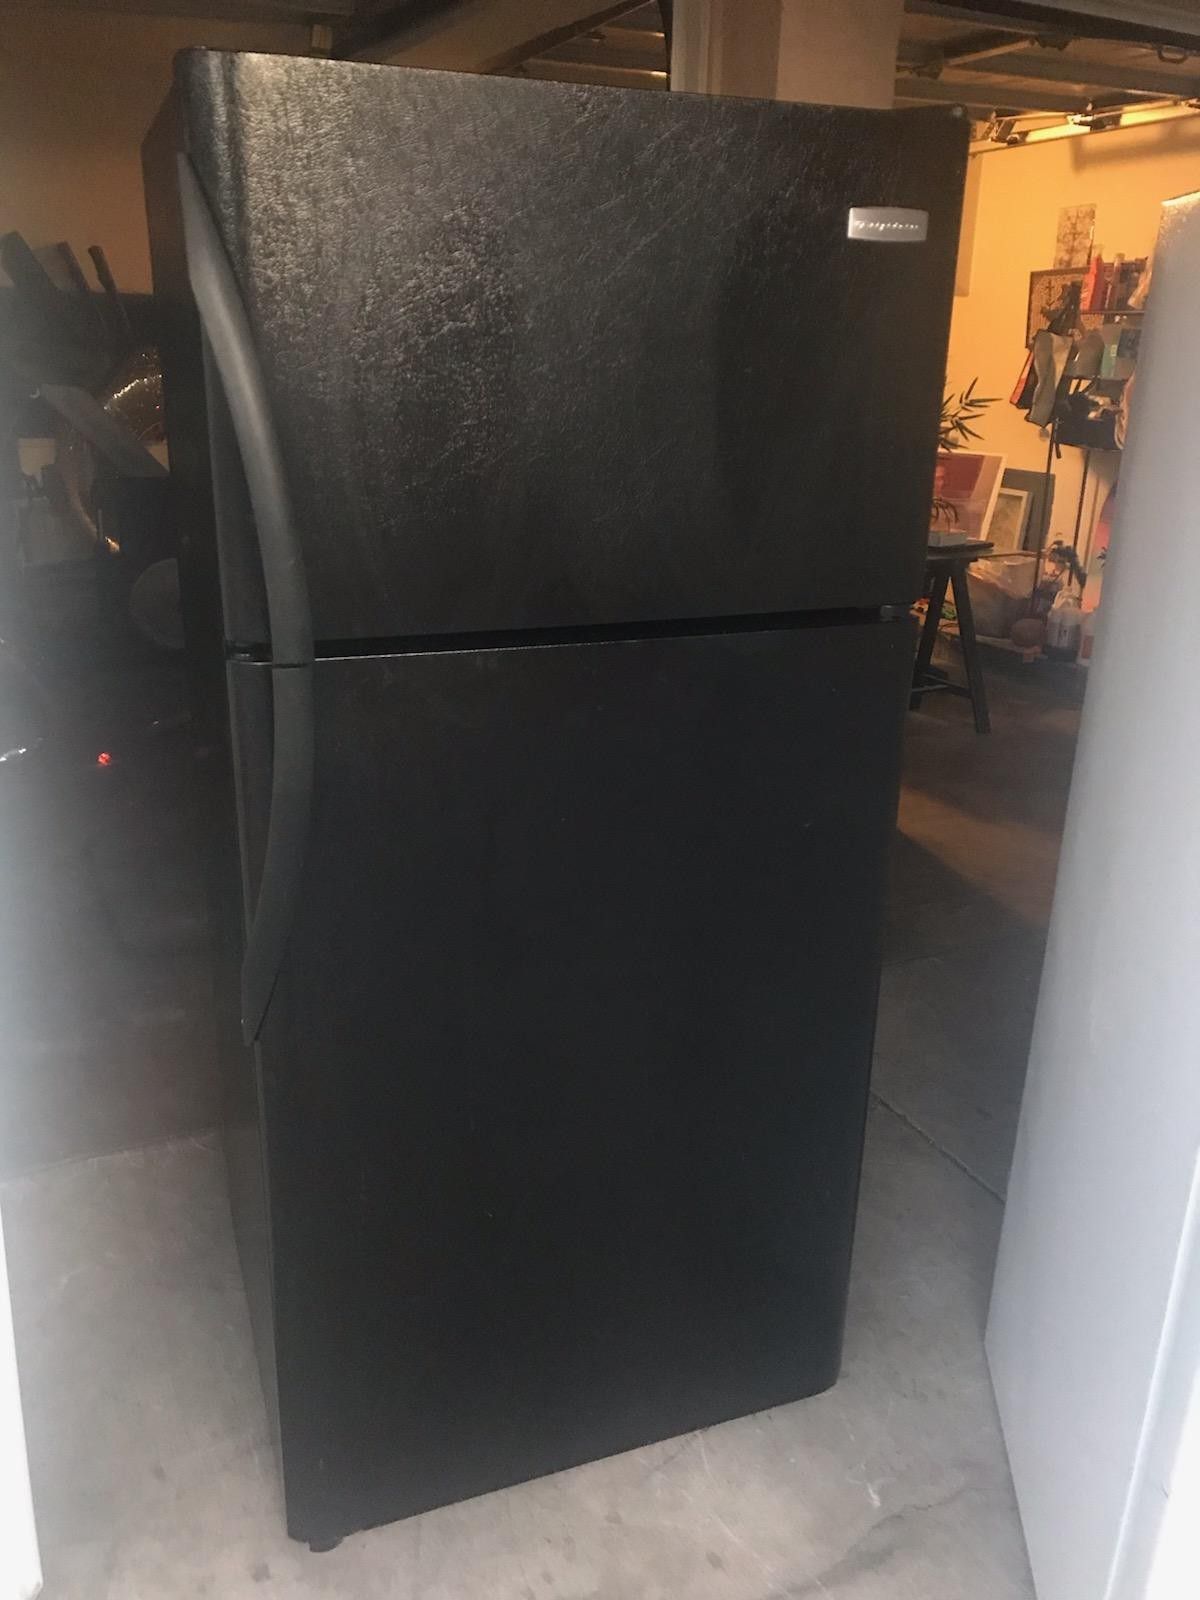 $260 FRIGIDAIRE black 18 cubic fridge includes delivery in the San Fernando valley warranty and installation